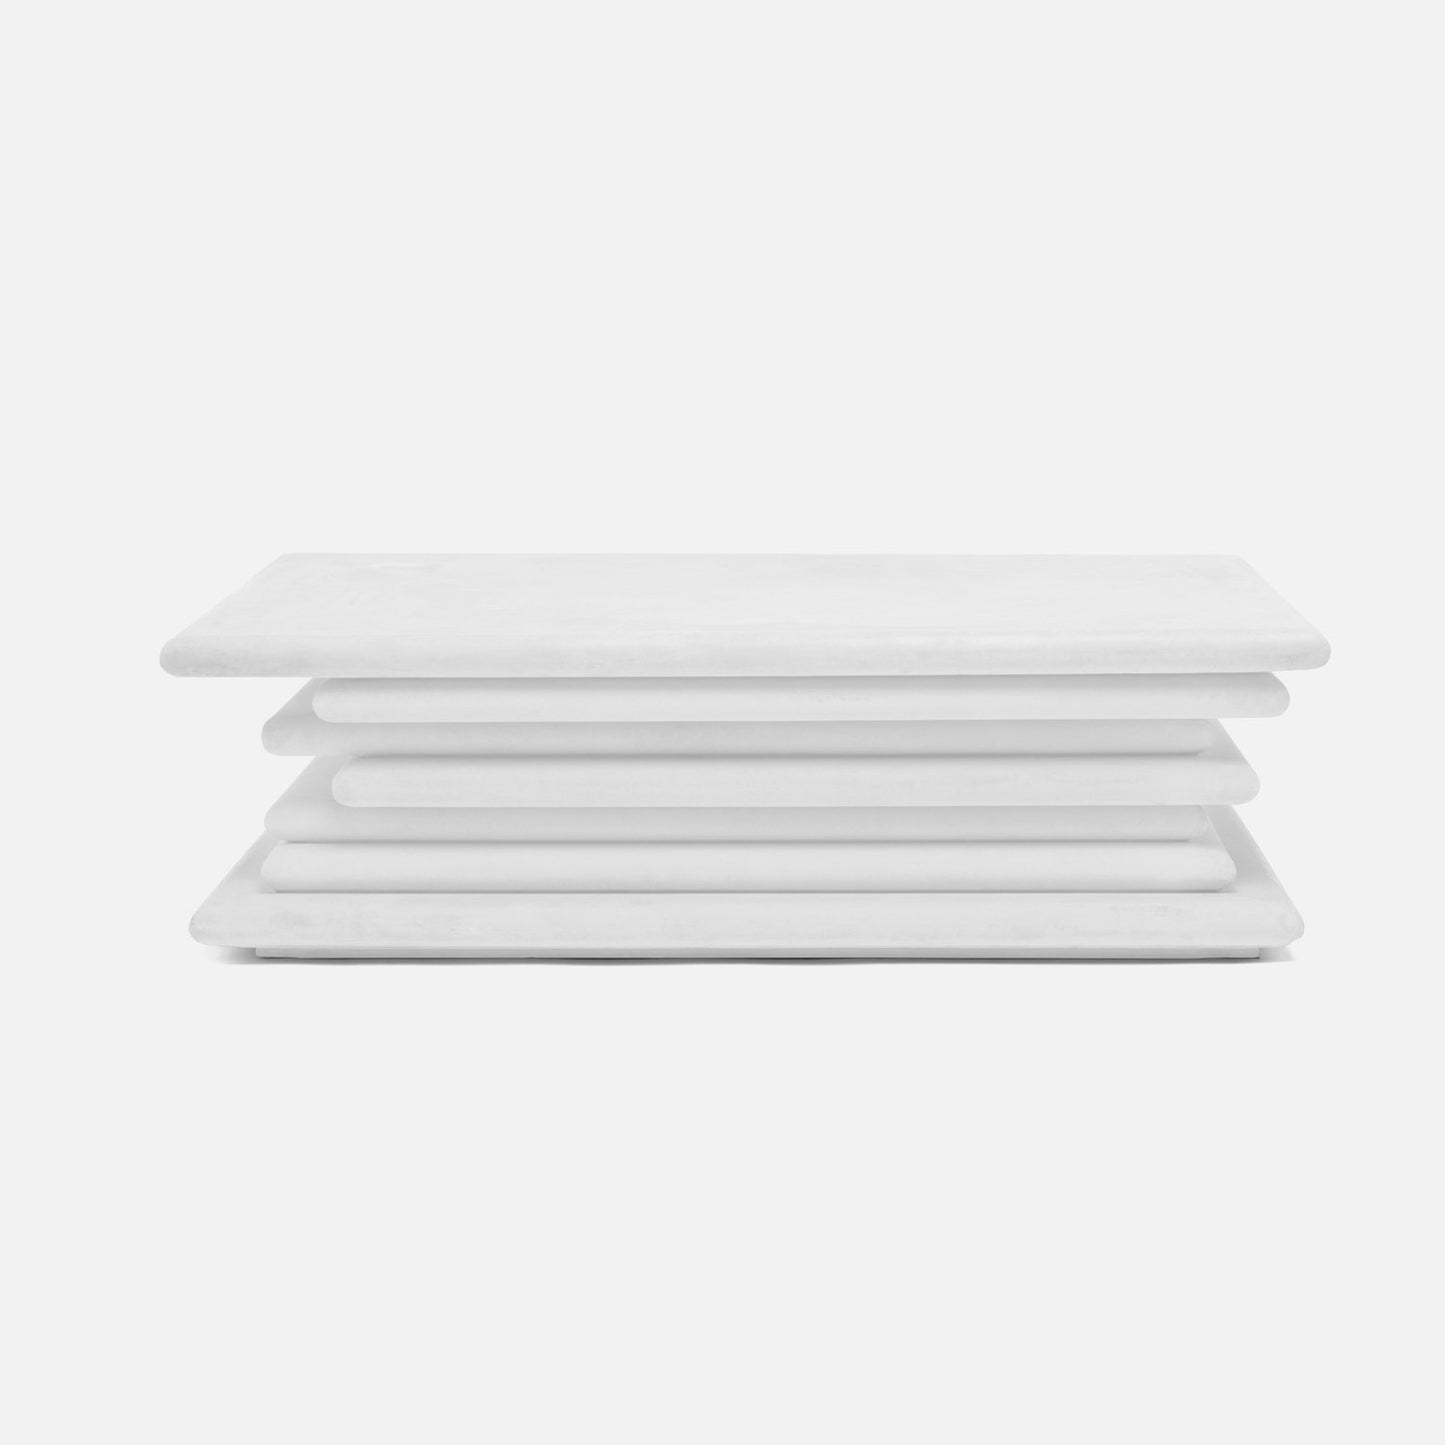 made goods dorsey coffee table white plaster 54 inch